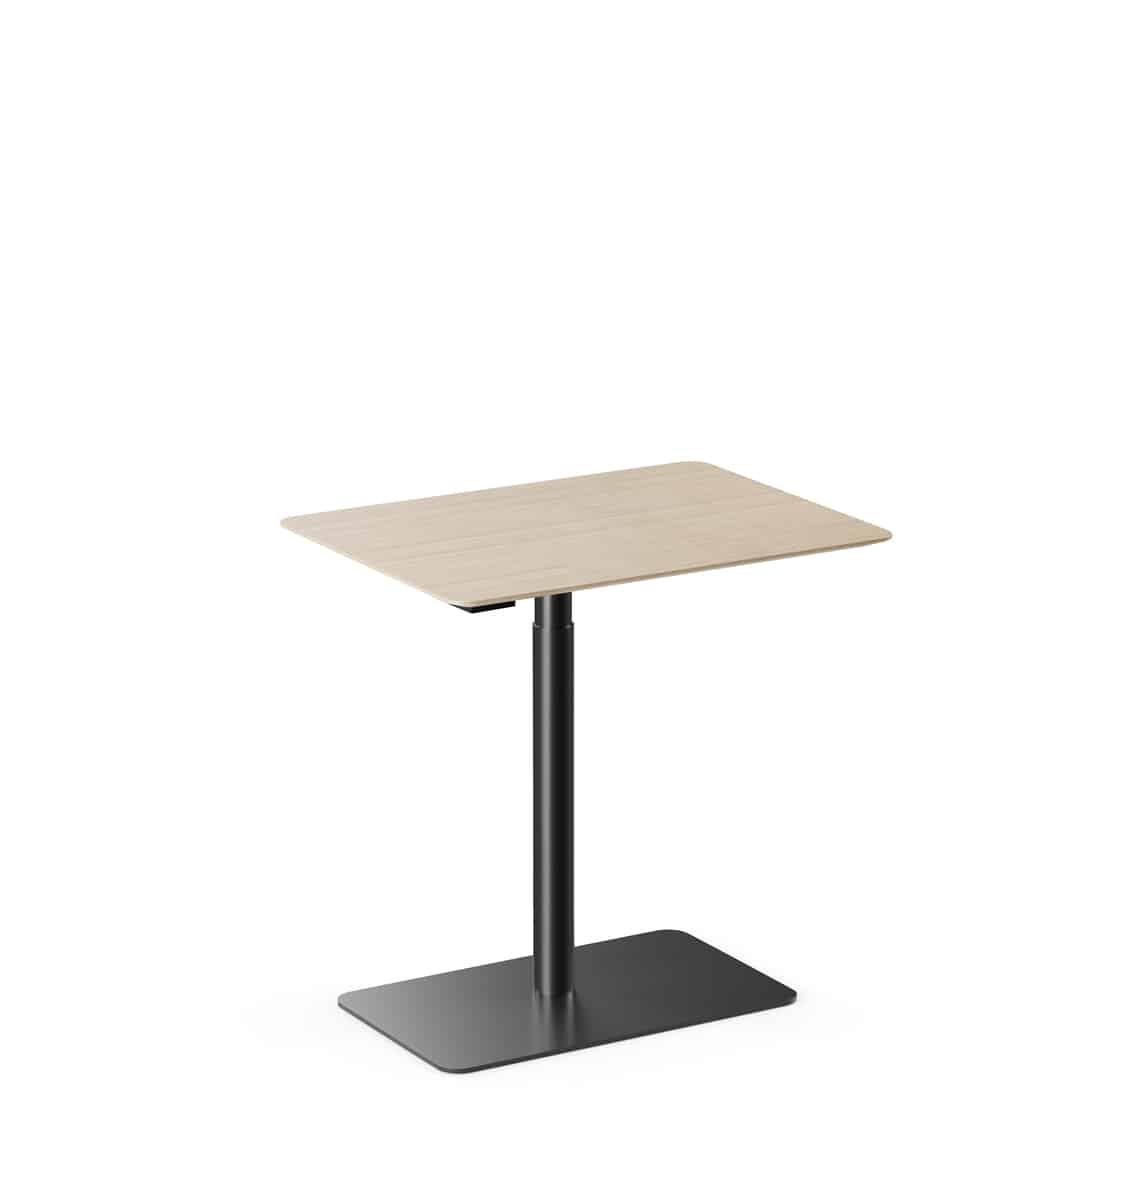 Bobby_sit_and_stand_table_80x60_03_Documents_jpg_1200_px